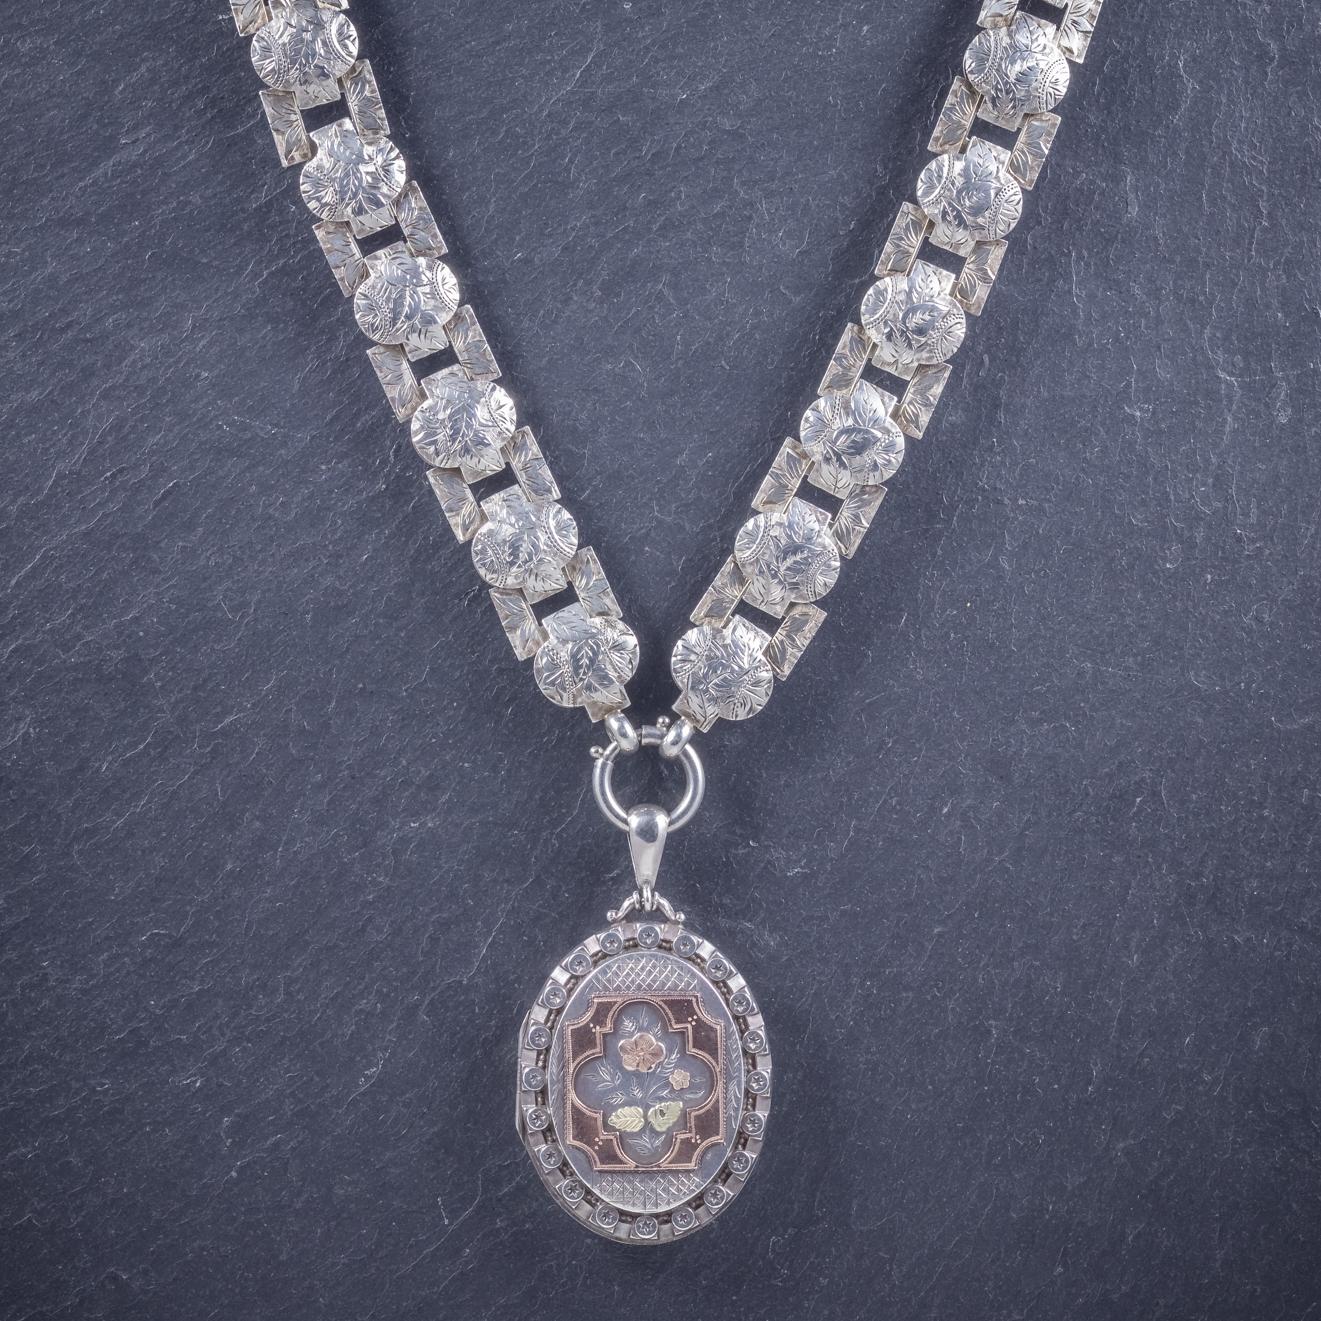 A grand antique Victorian collar Circa 1860, featuring a lovely locket engraved with an 18ct Gold Forget me not on the front inside a Rose Gold frame. 

The locket is bordered in stars and features a large ‘B’ initial on the back which may have been